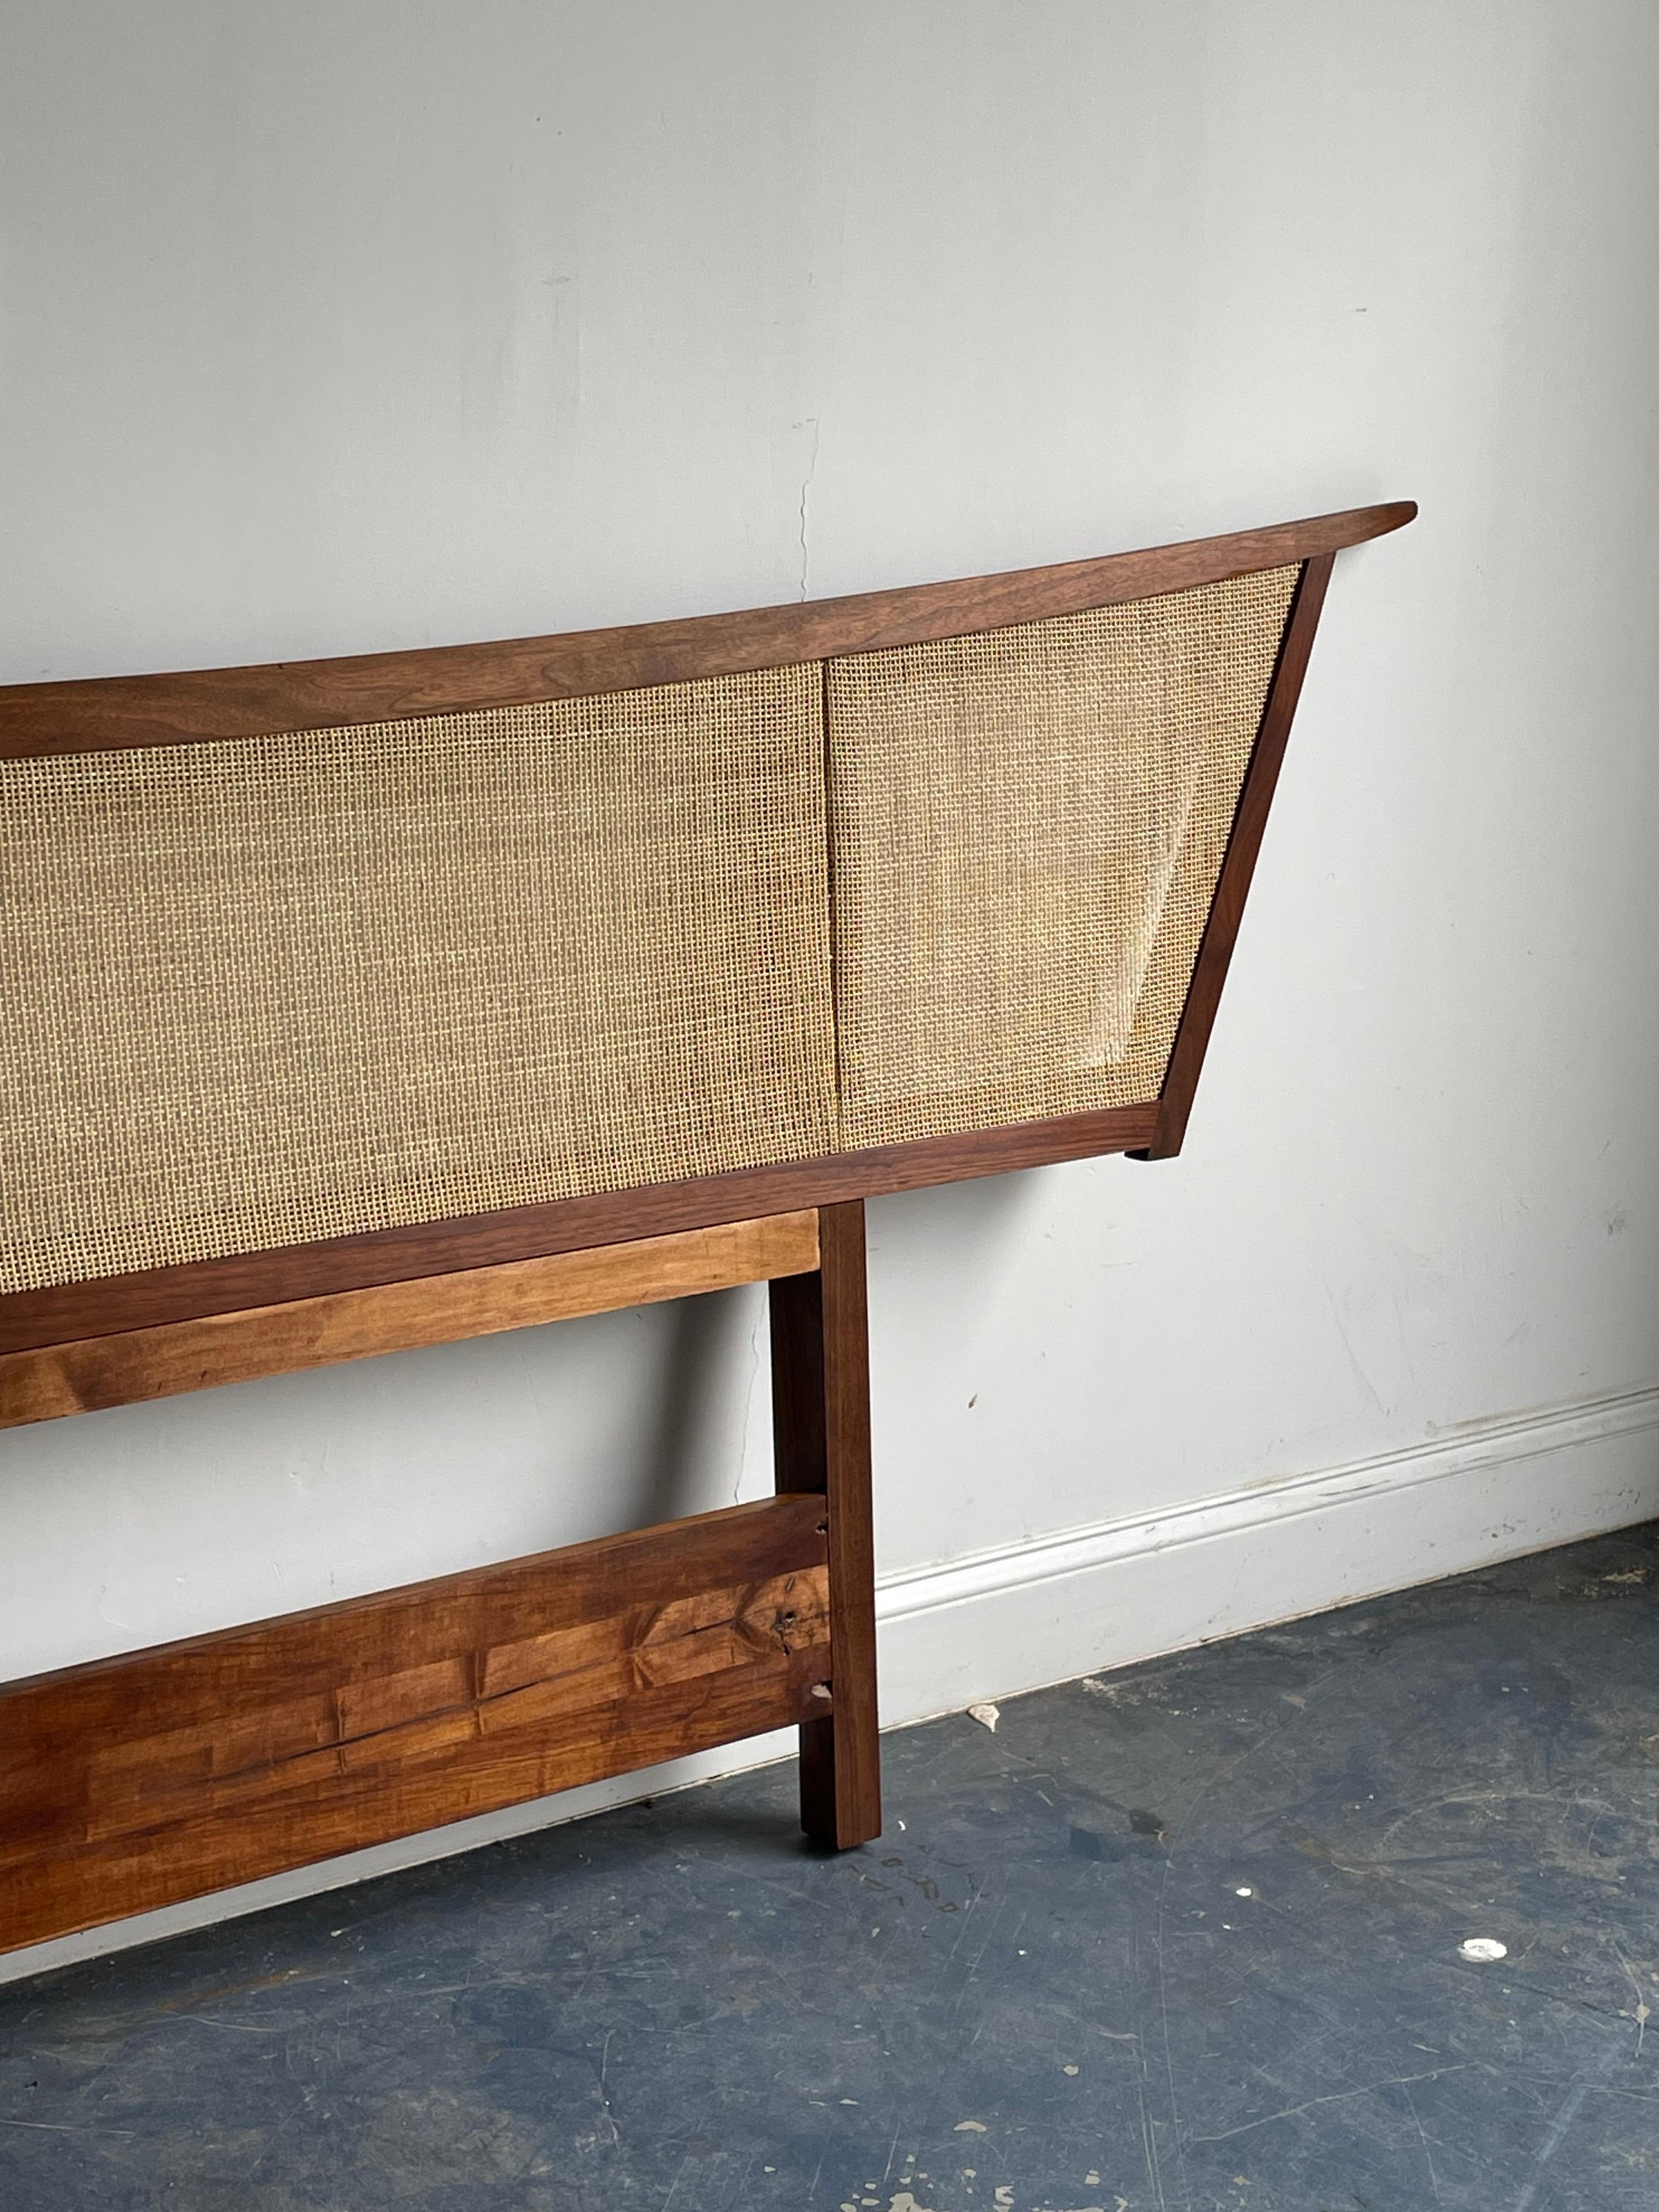 Large Kingsize headboard designed by George Nakashima for Widdicomb furniture. Piece was produce in 1961 per the date shown (3/1961). Headboard has been newly refinished and caned. Some wear around the placement of the bed frame brackets will go.